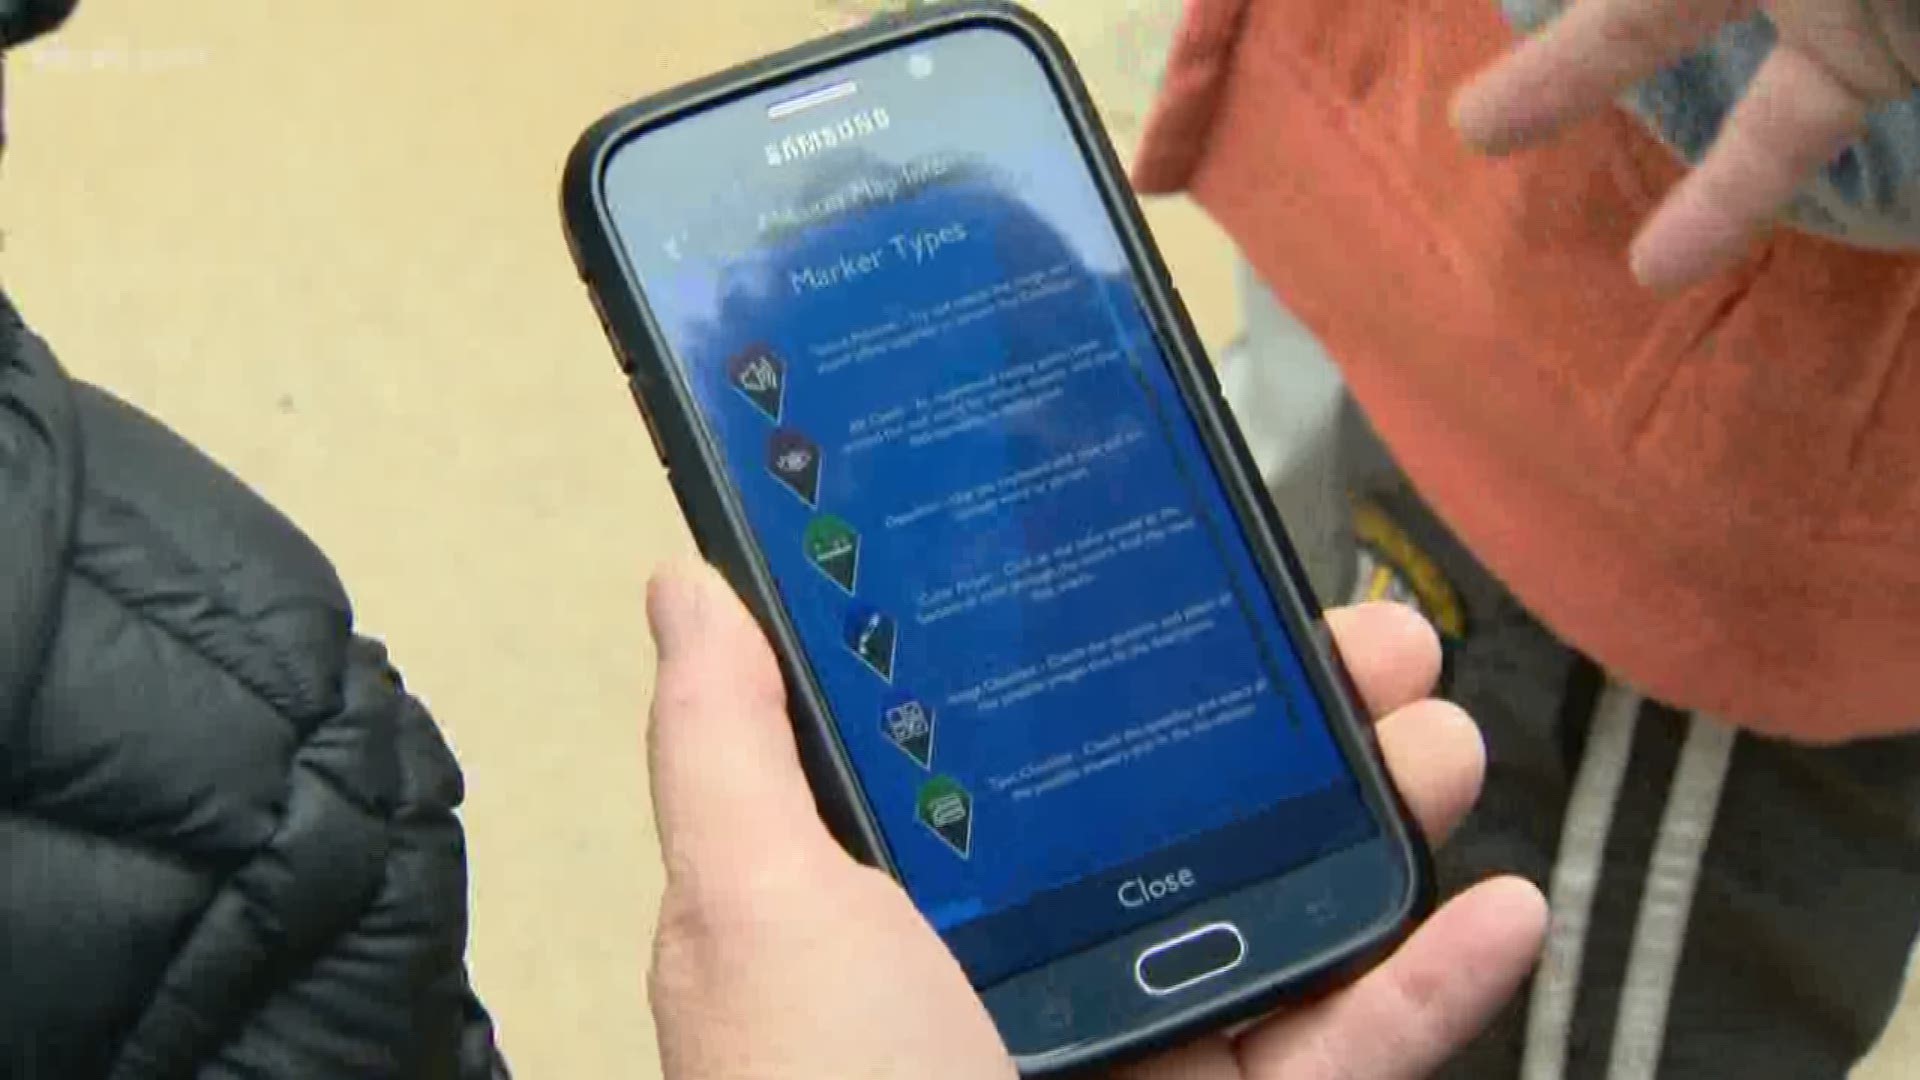 Perfect for families looking to spend time outdoors, the Phil Hardberger Park Conservancy has created a free, educational app to get our youth active, engaged and learning about the world around them. KENS 5 Eyewitness News Photojournalist Jason Eggleston takes us there.